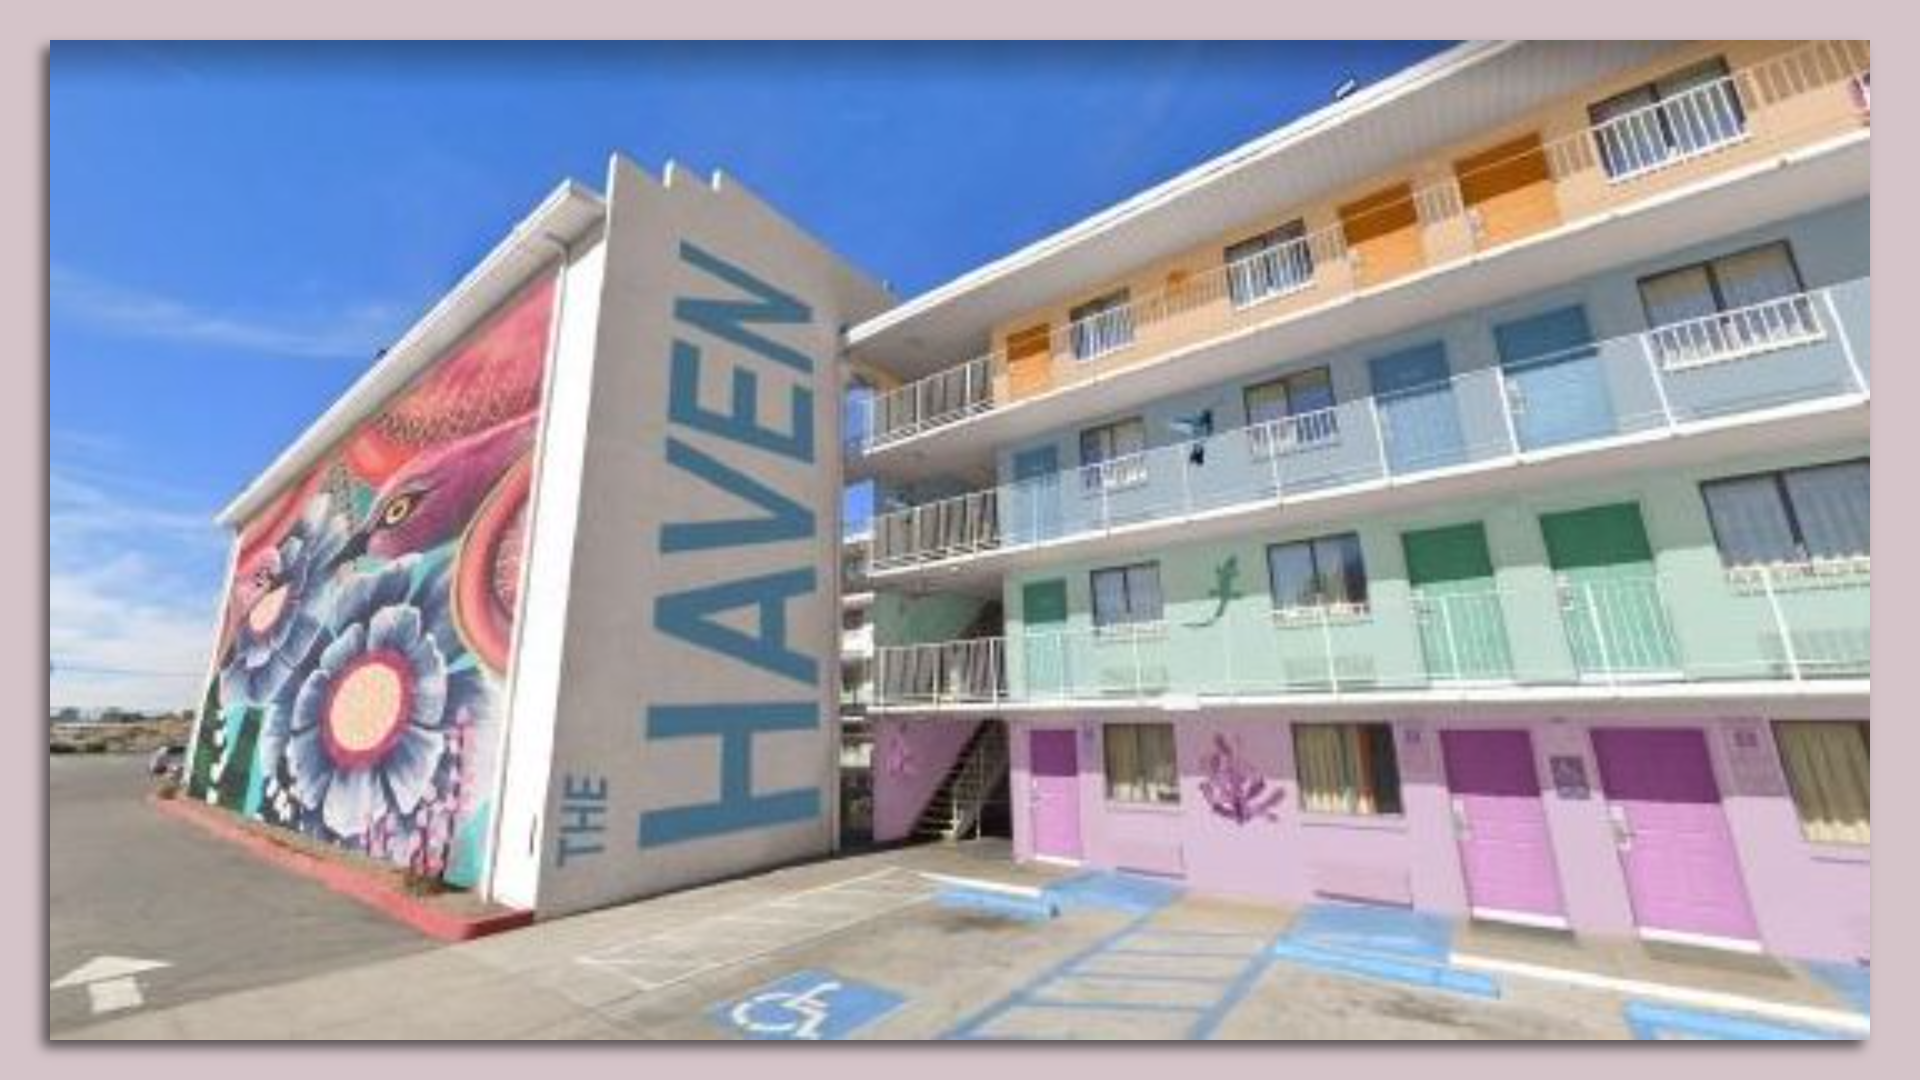 A rendering of a hotel that is brightly colored and says "The Haven."